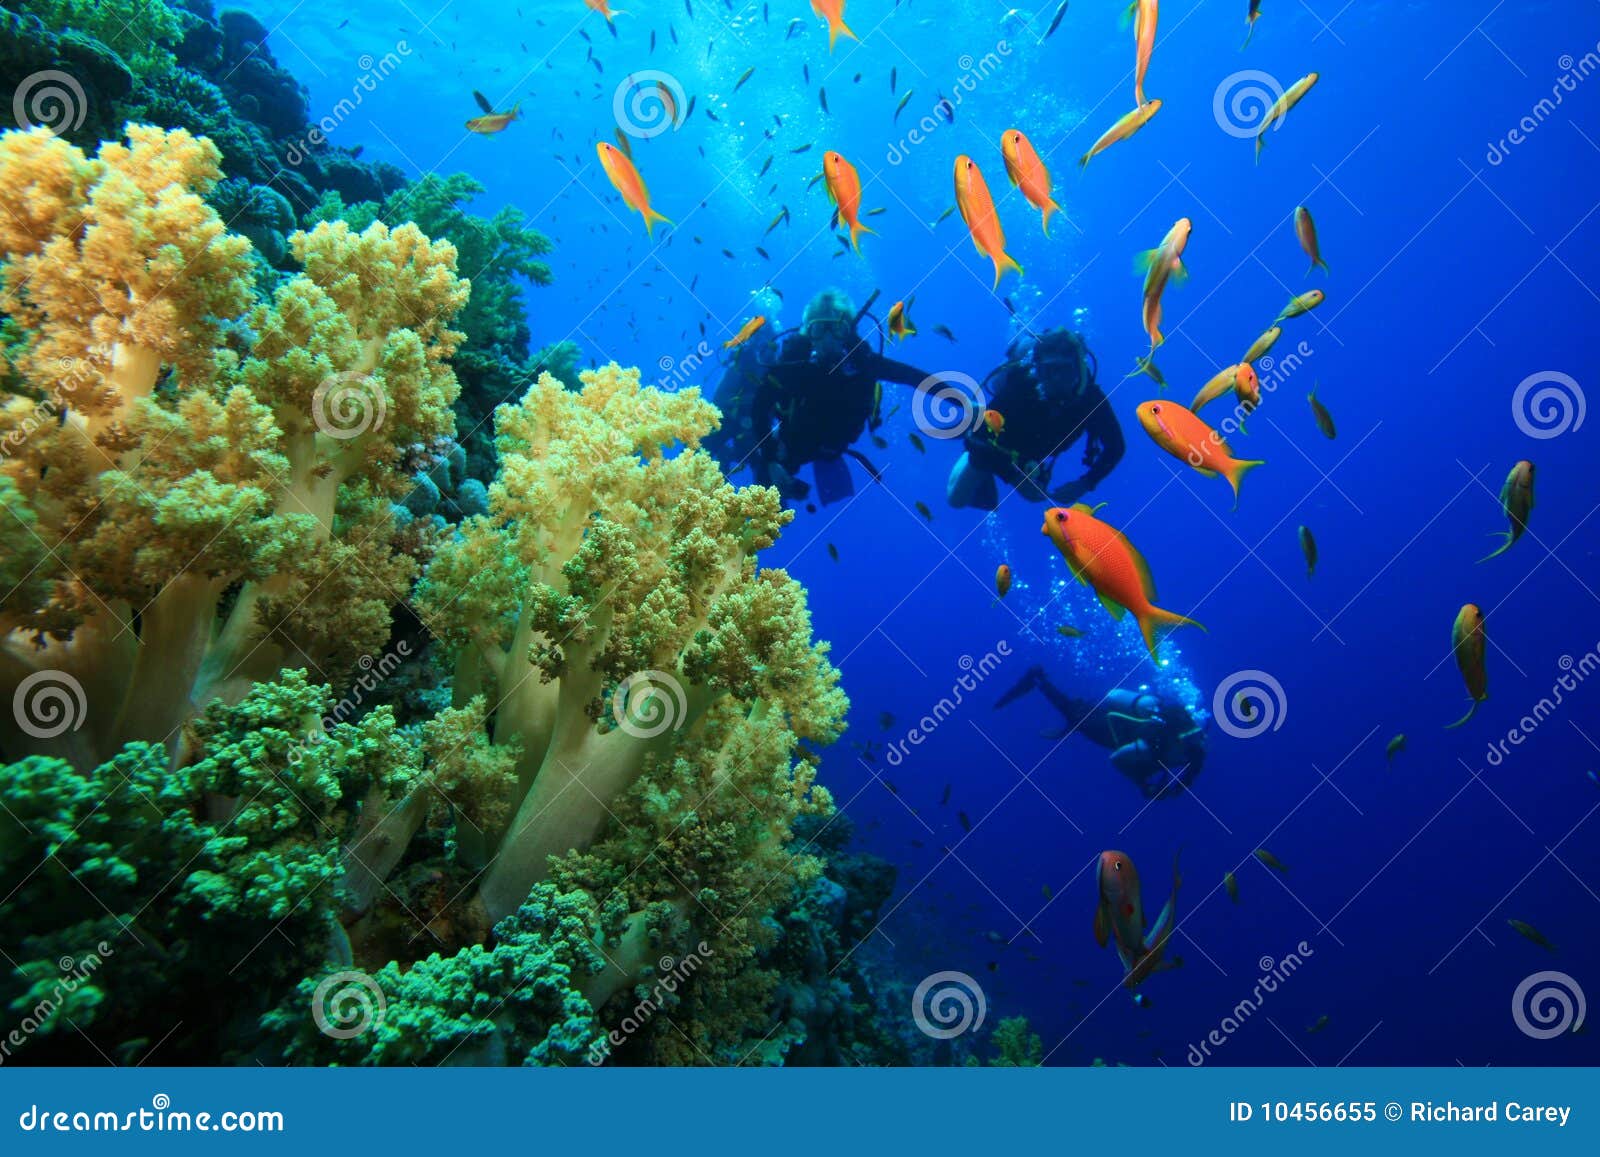 Coral Reef and Scuba Divers Stock Image - Image of background, fish ...